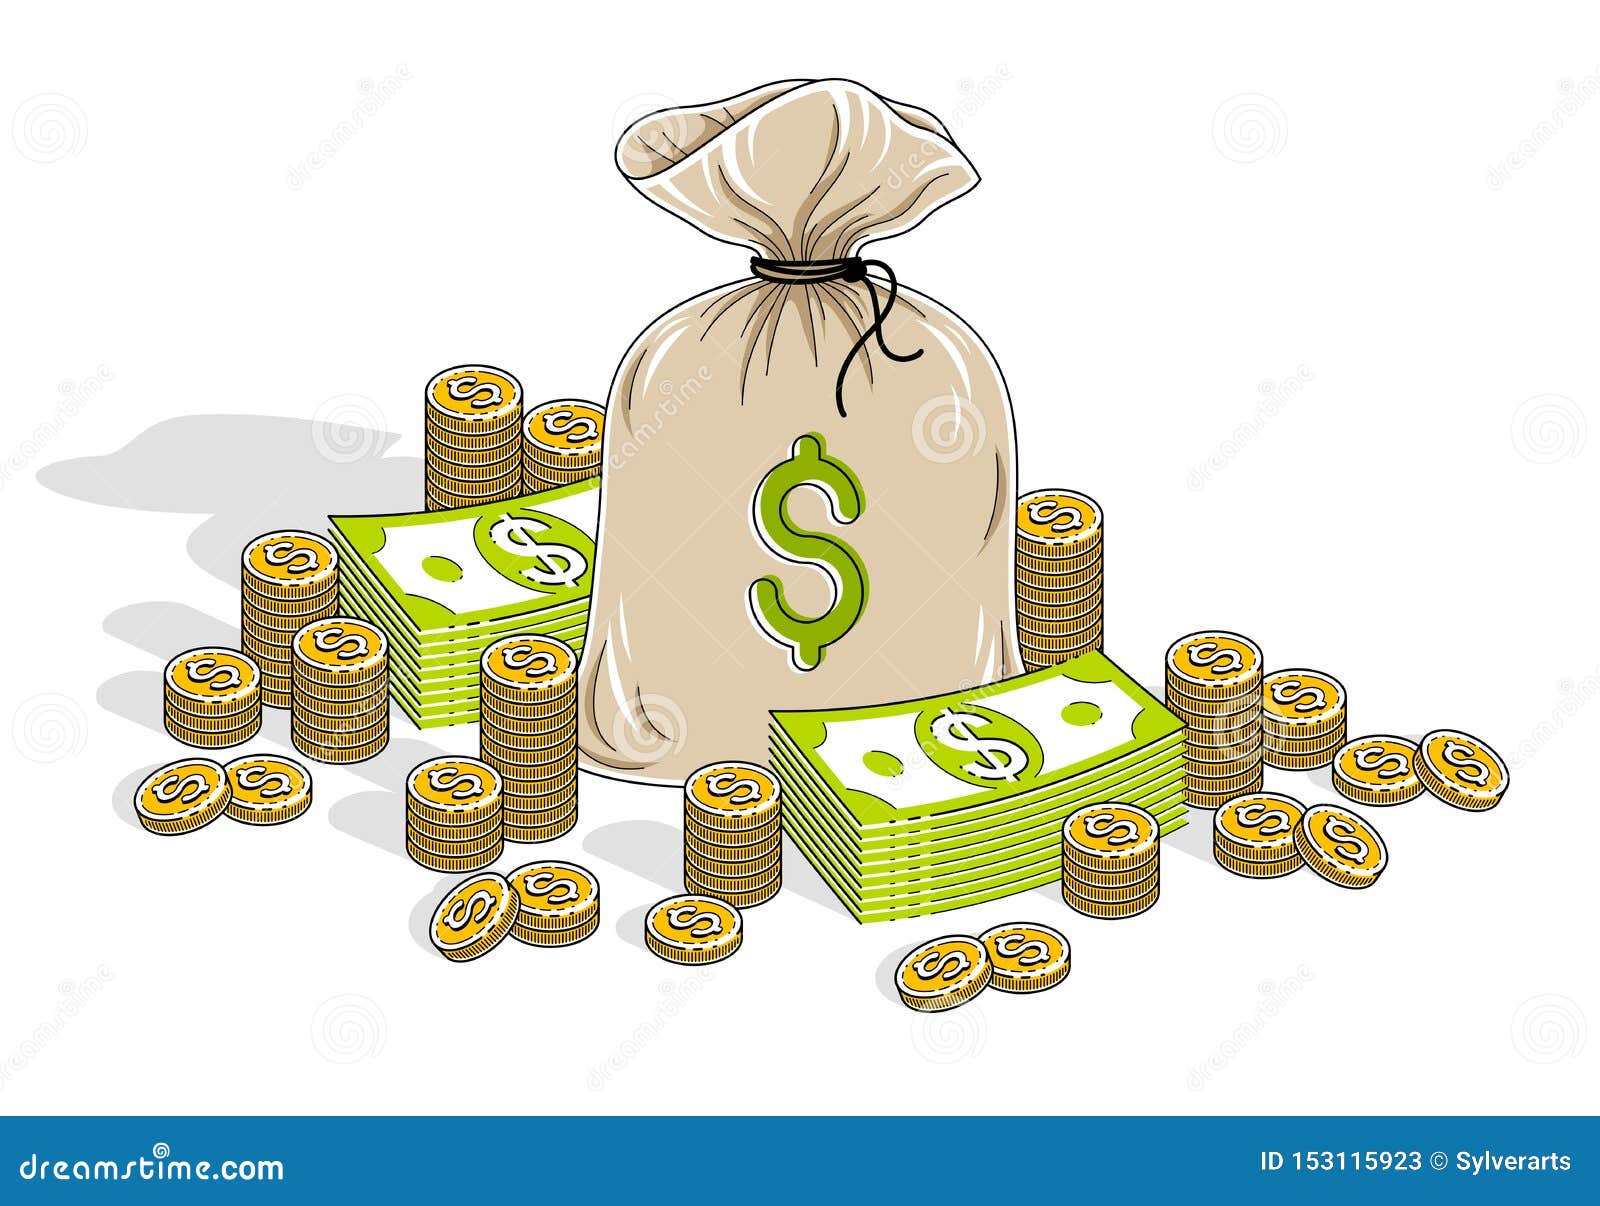 cash riches and wealth, money bag with dollar stacks and coins cents piles  on white background. isometric  business